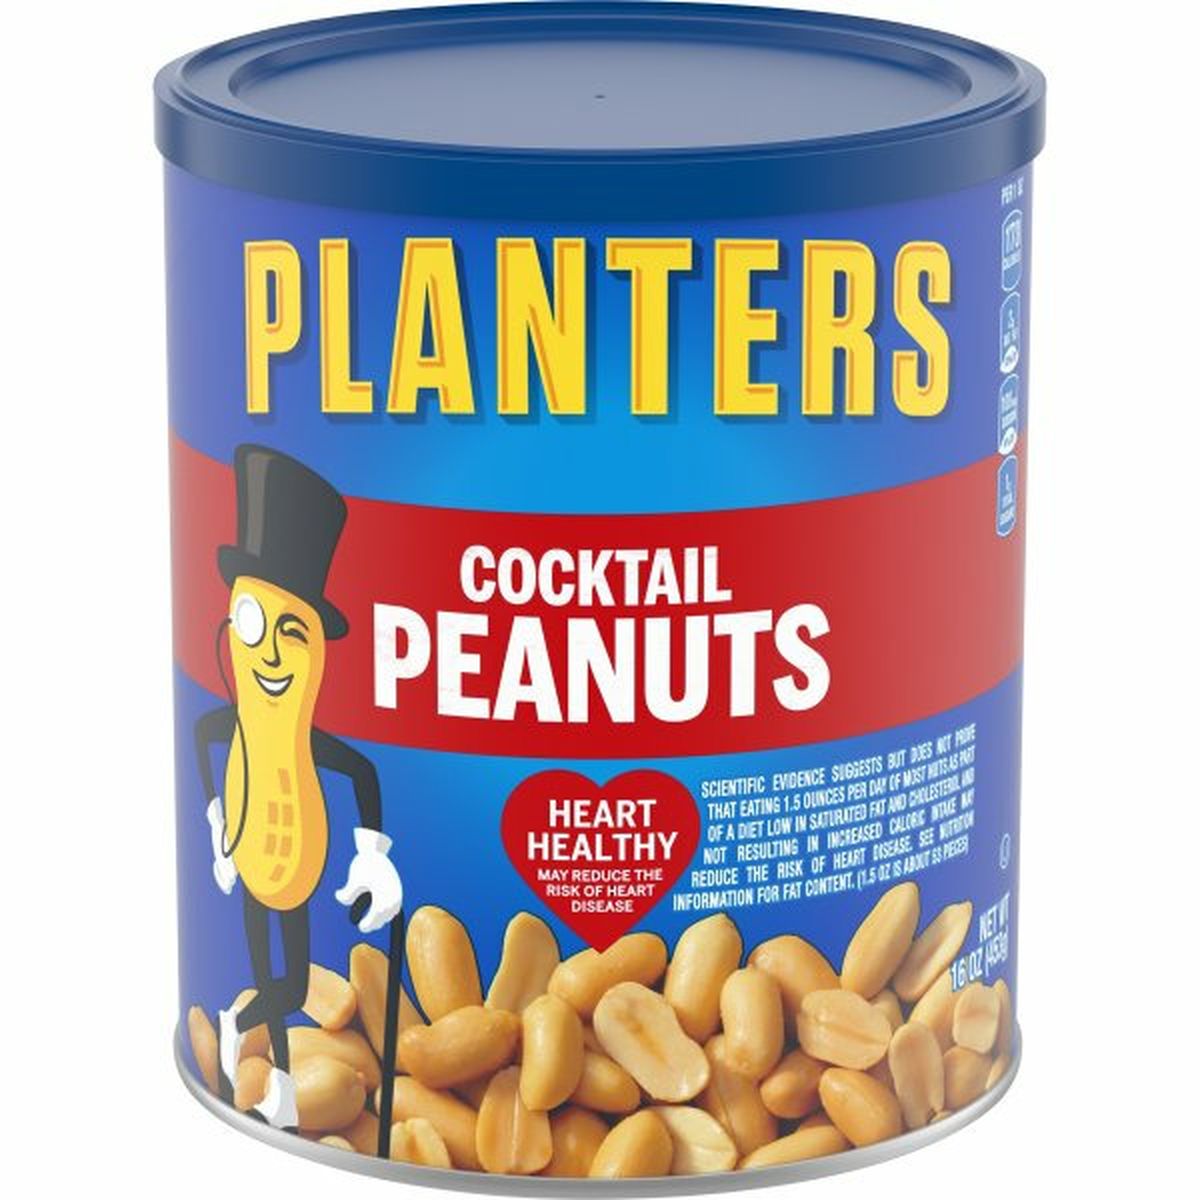 Calories in Planters Cocktail Peanuts